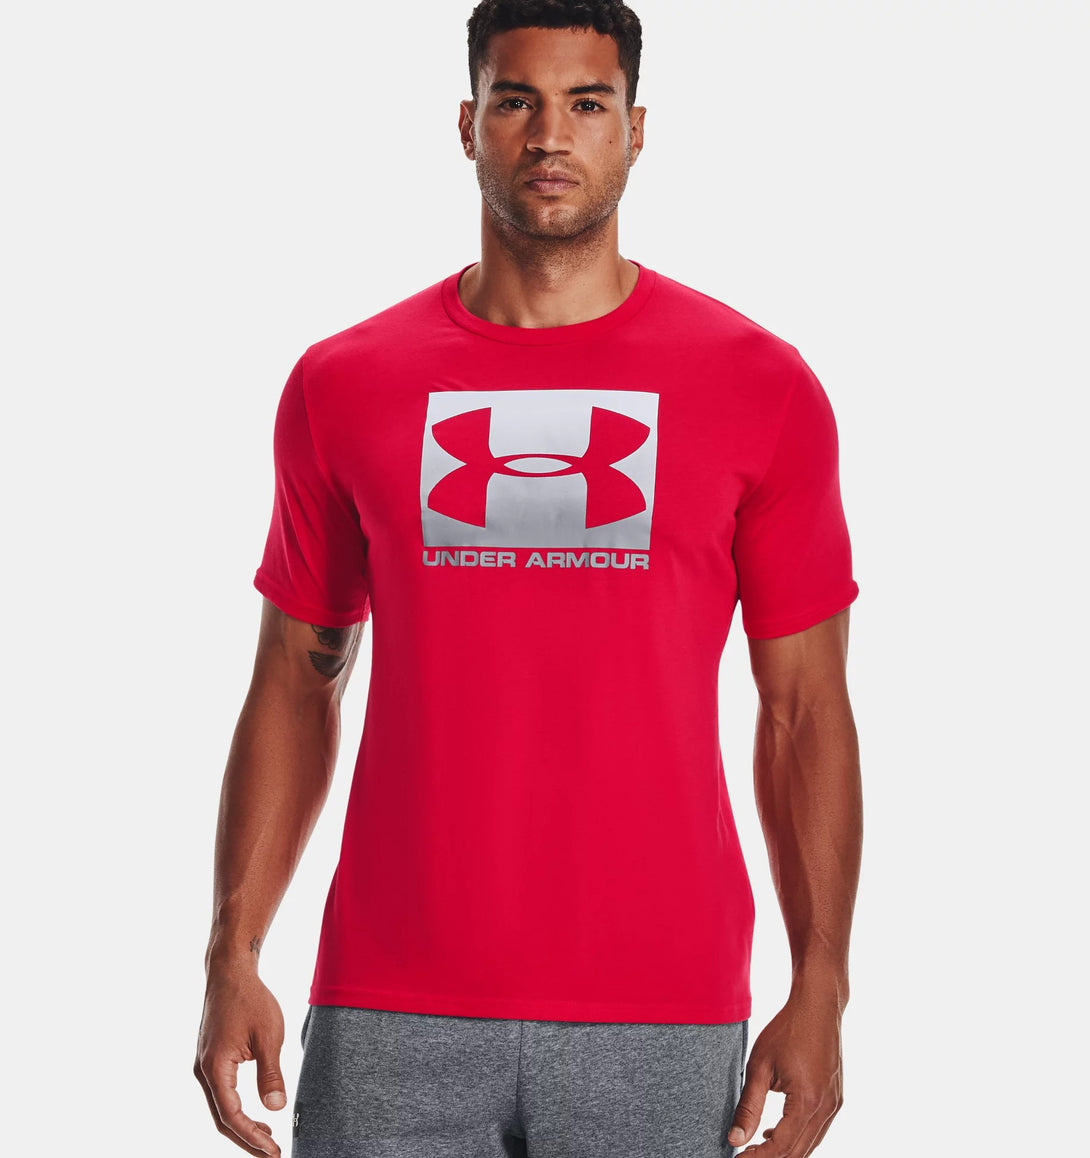 Under Armour Adults Boxed Sportstyle T-Shirt